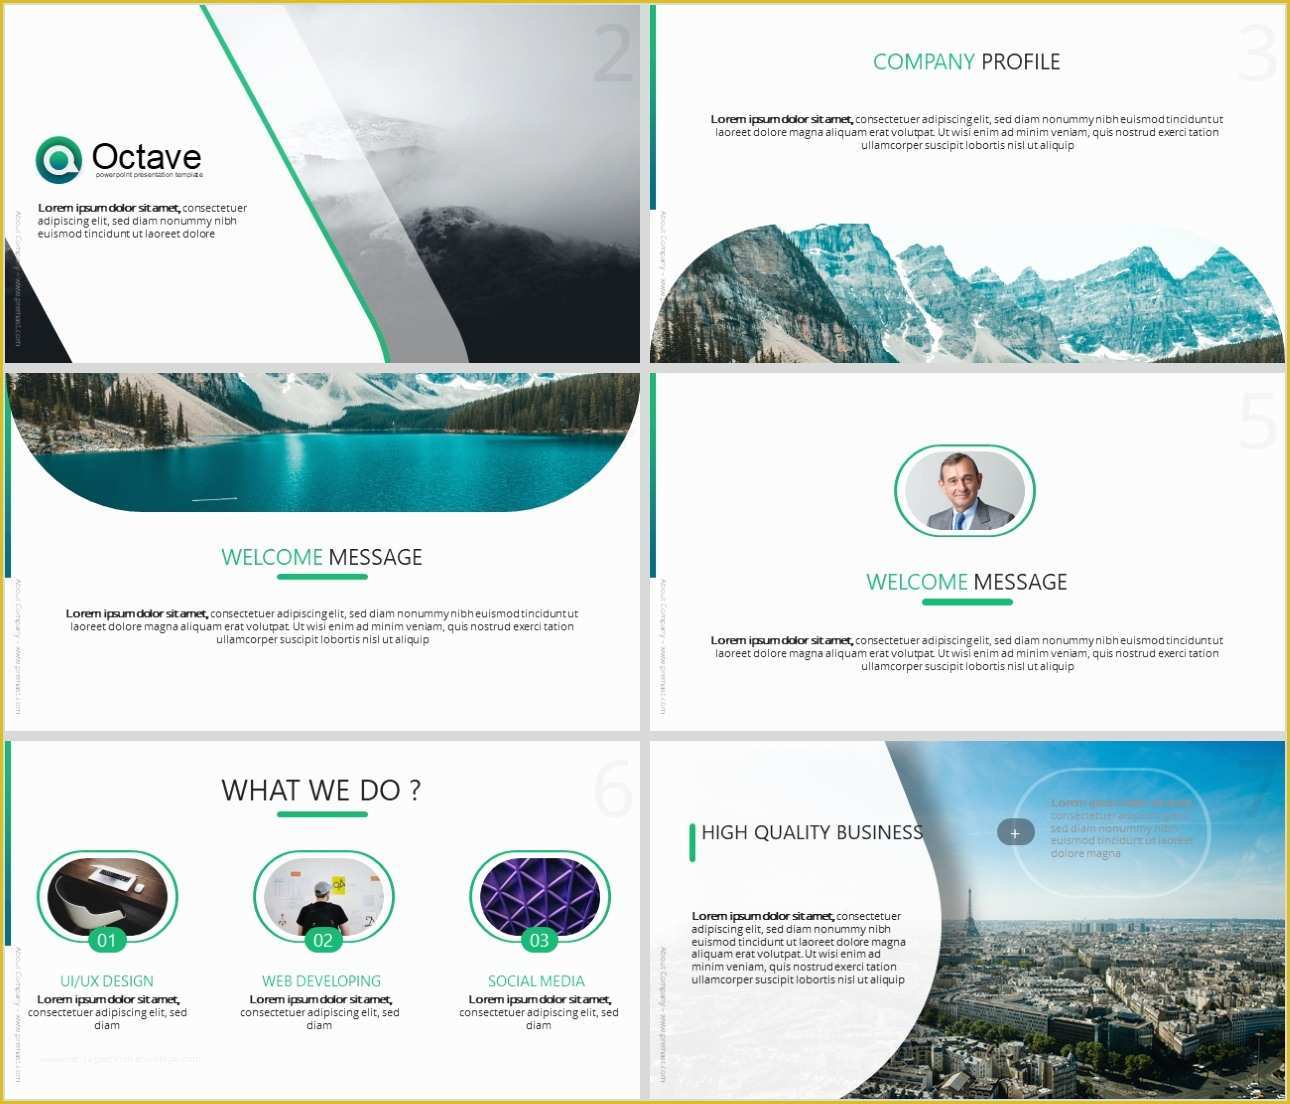 Free Powerpoint Template Design 2017 Of Octave Free Powerpoint Presentation Template Just Free